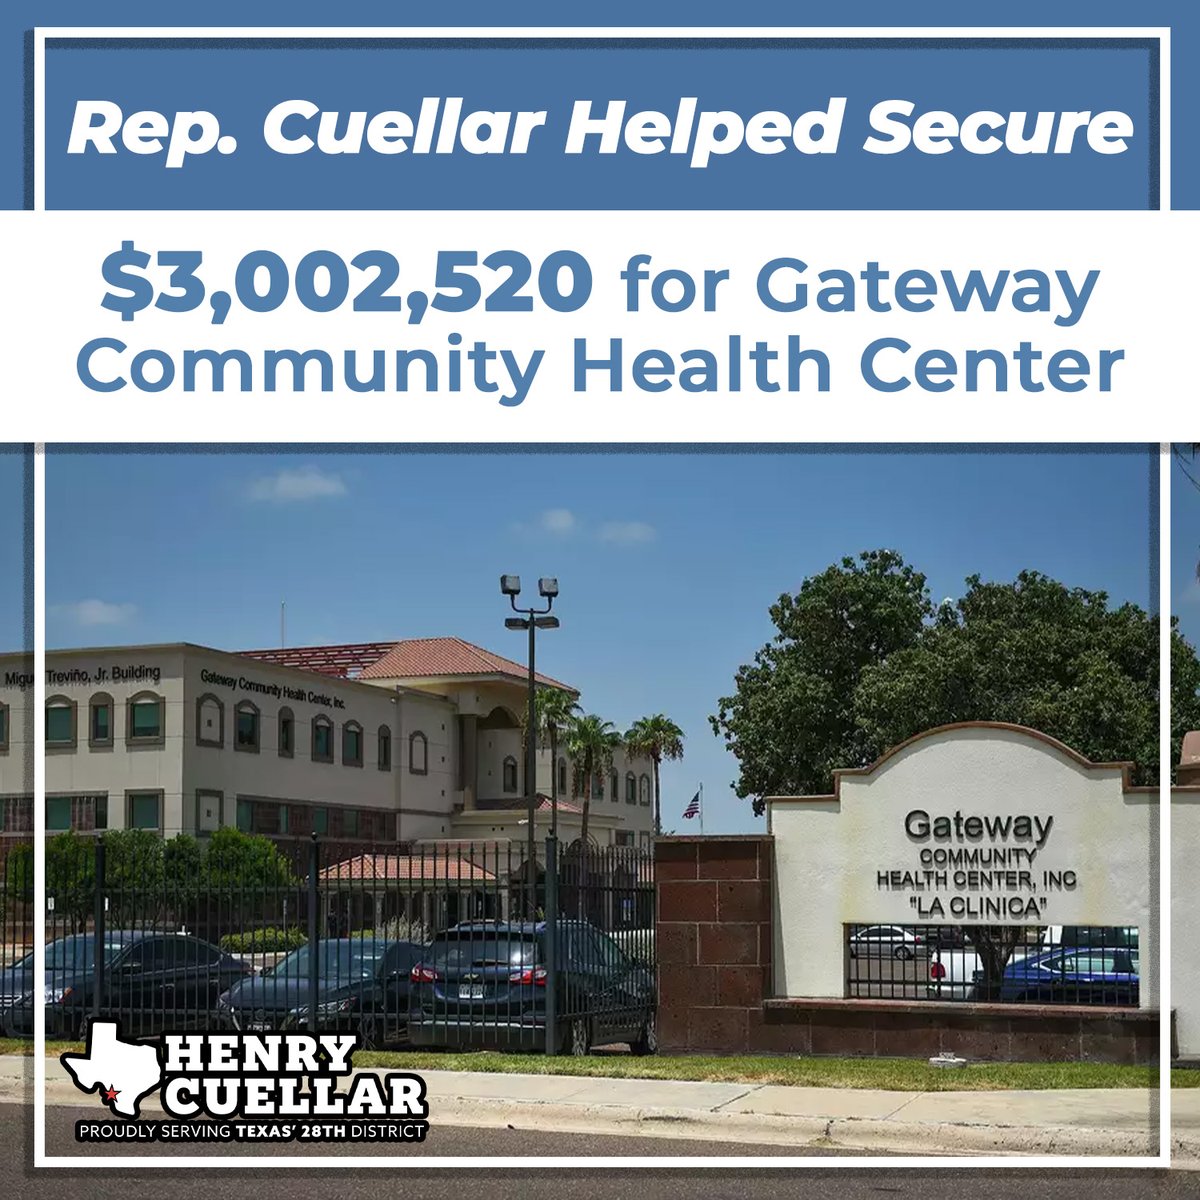 Today, I am pleased to announce a $3,000,000 HHS grant for Gateway Community Health Center. These funds will ensure the center can continue running effectively while taking care of as many people as possible. I will continue working to expand affordable, accessible health care…